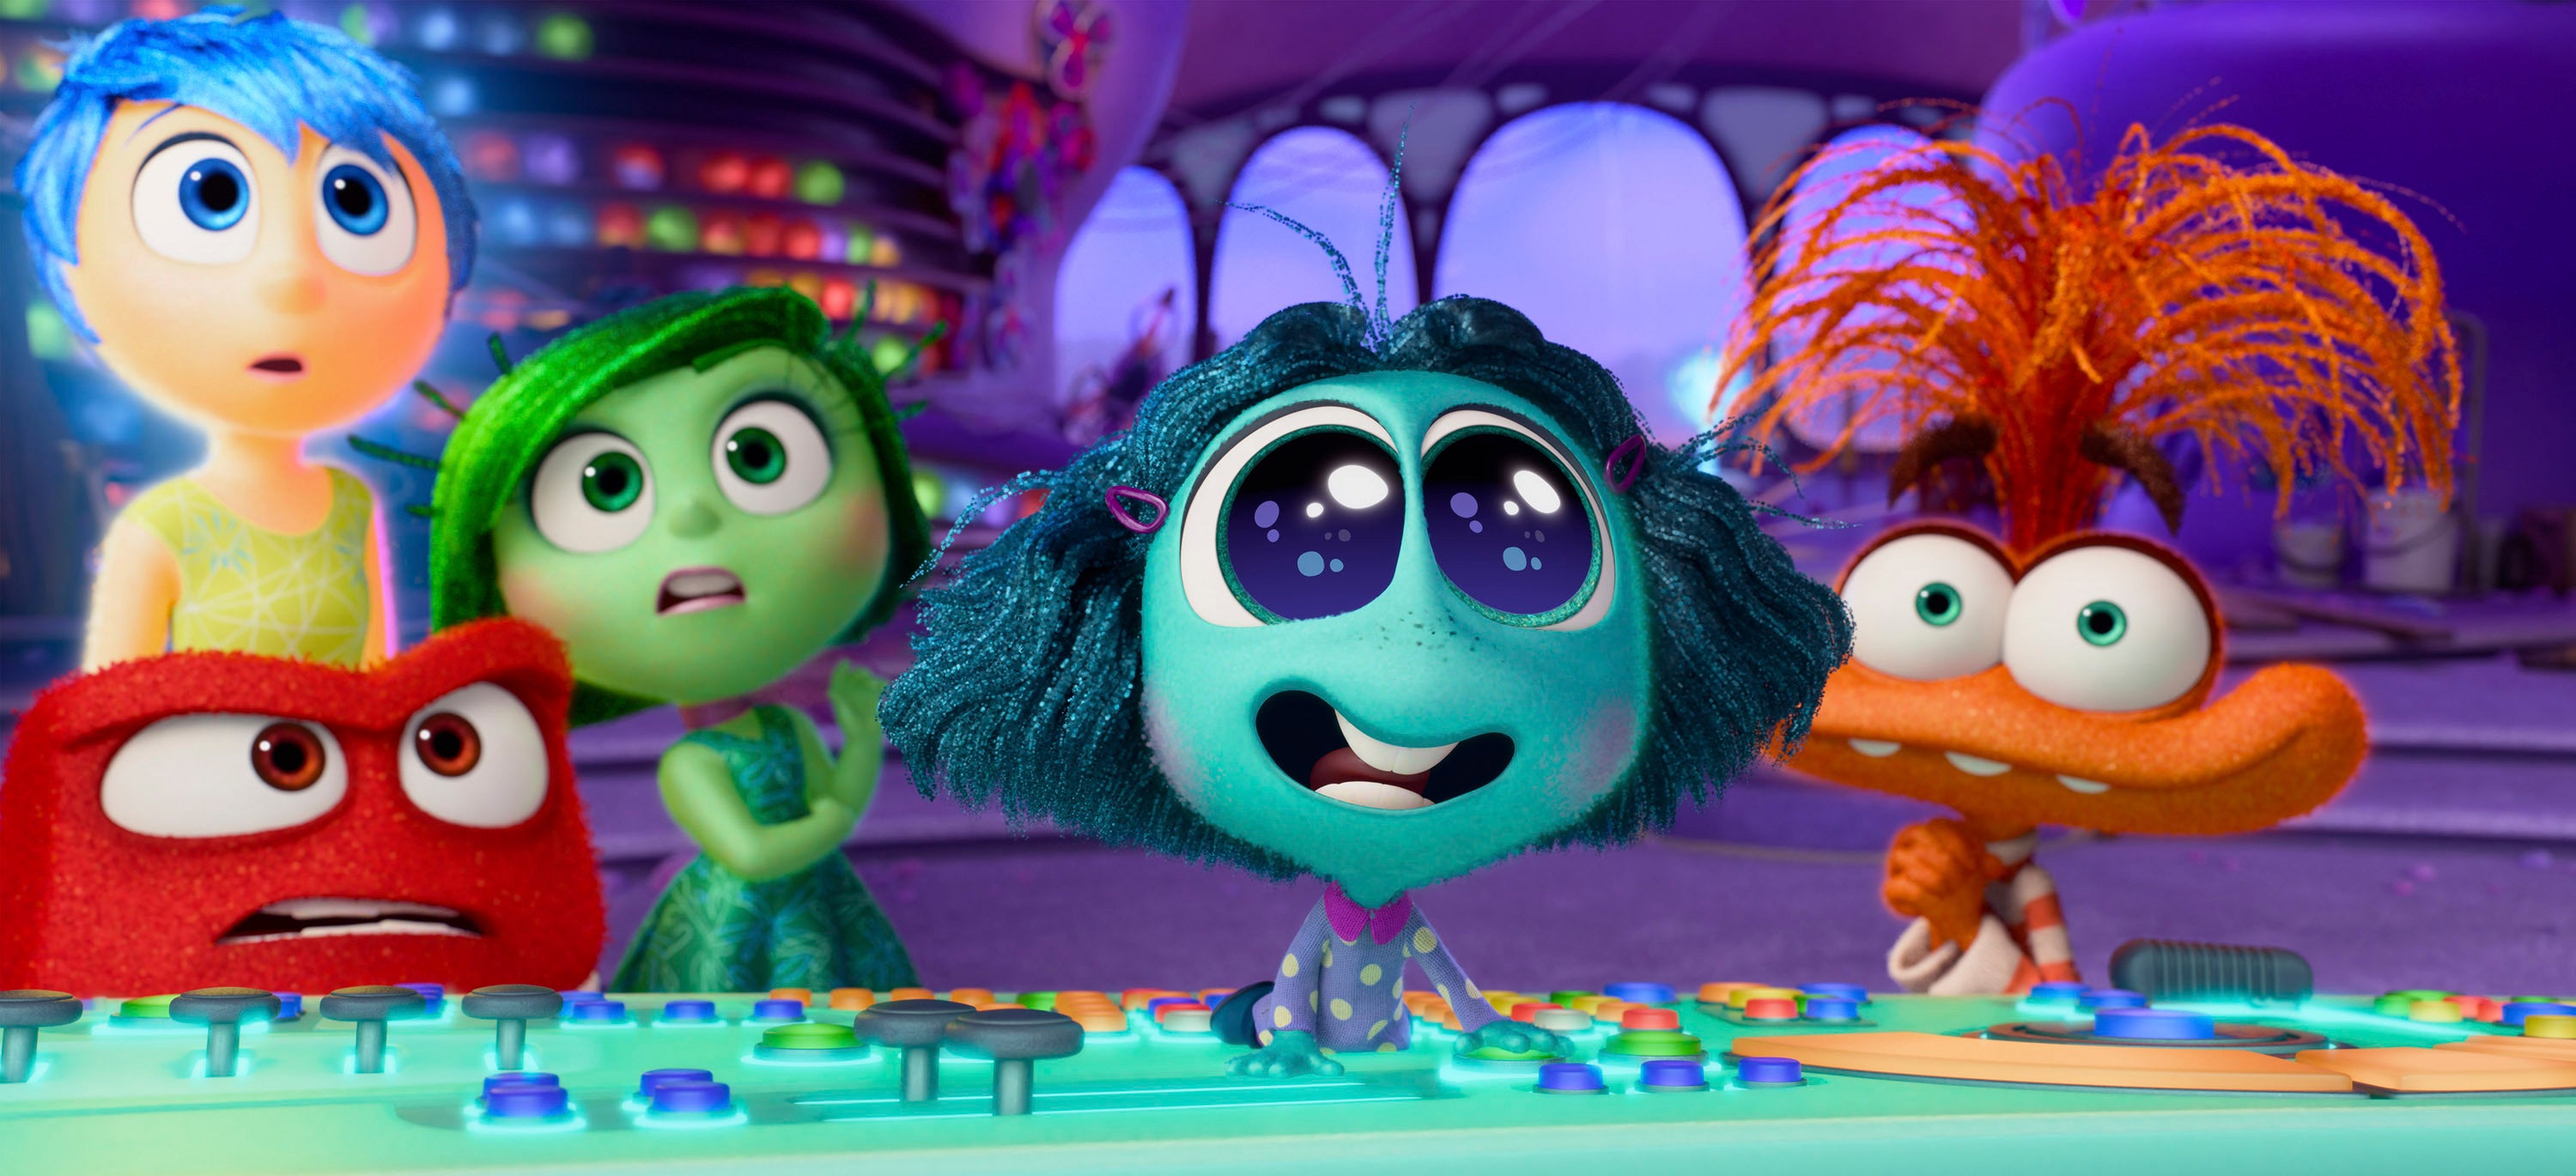 movie industry, box office, pixar, comscore, ‘inside out 2’ hits record $155m on opening weekend in dire year for the movie industry